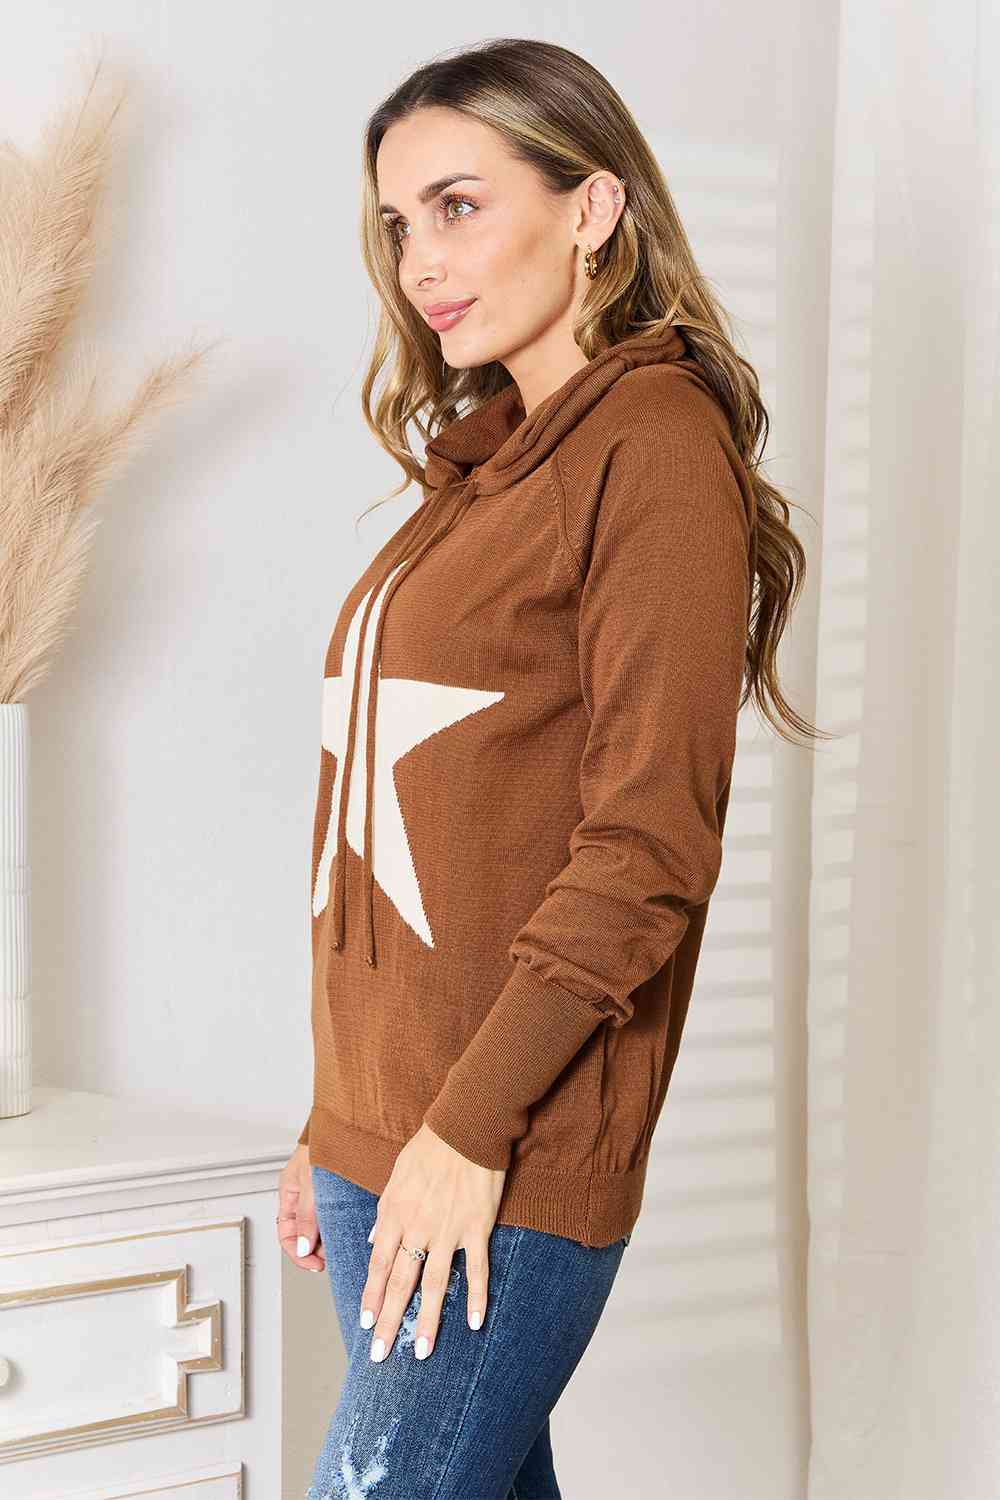 All Star Hooded Sweater